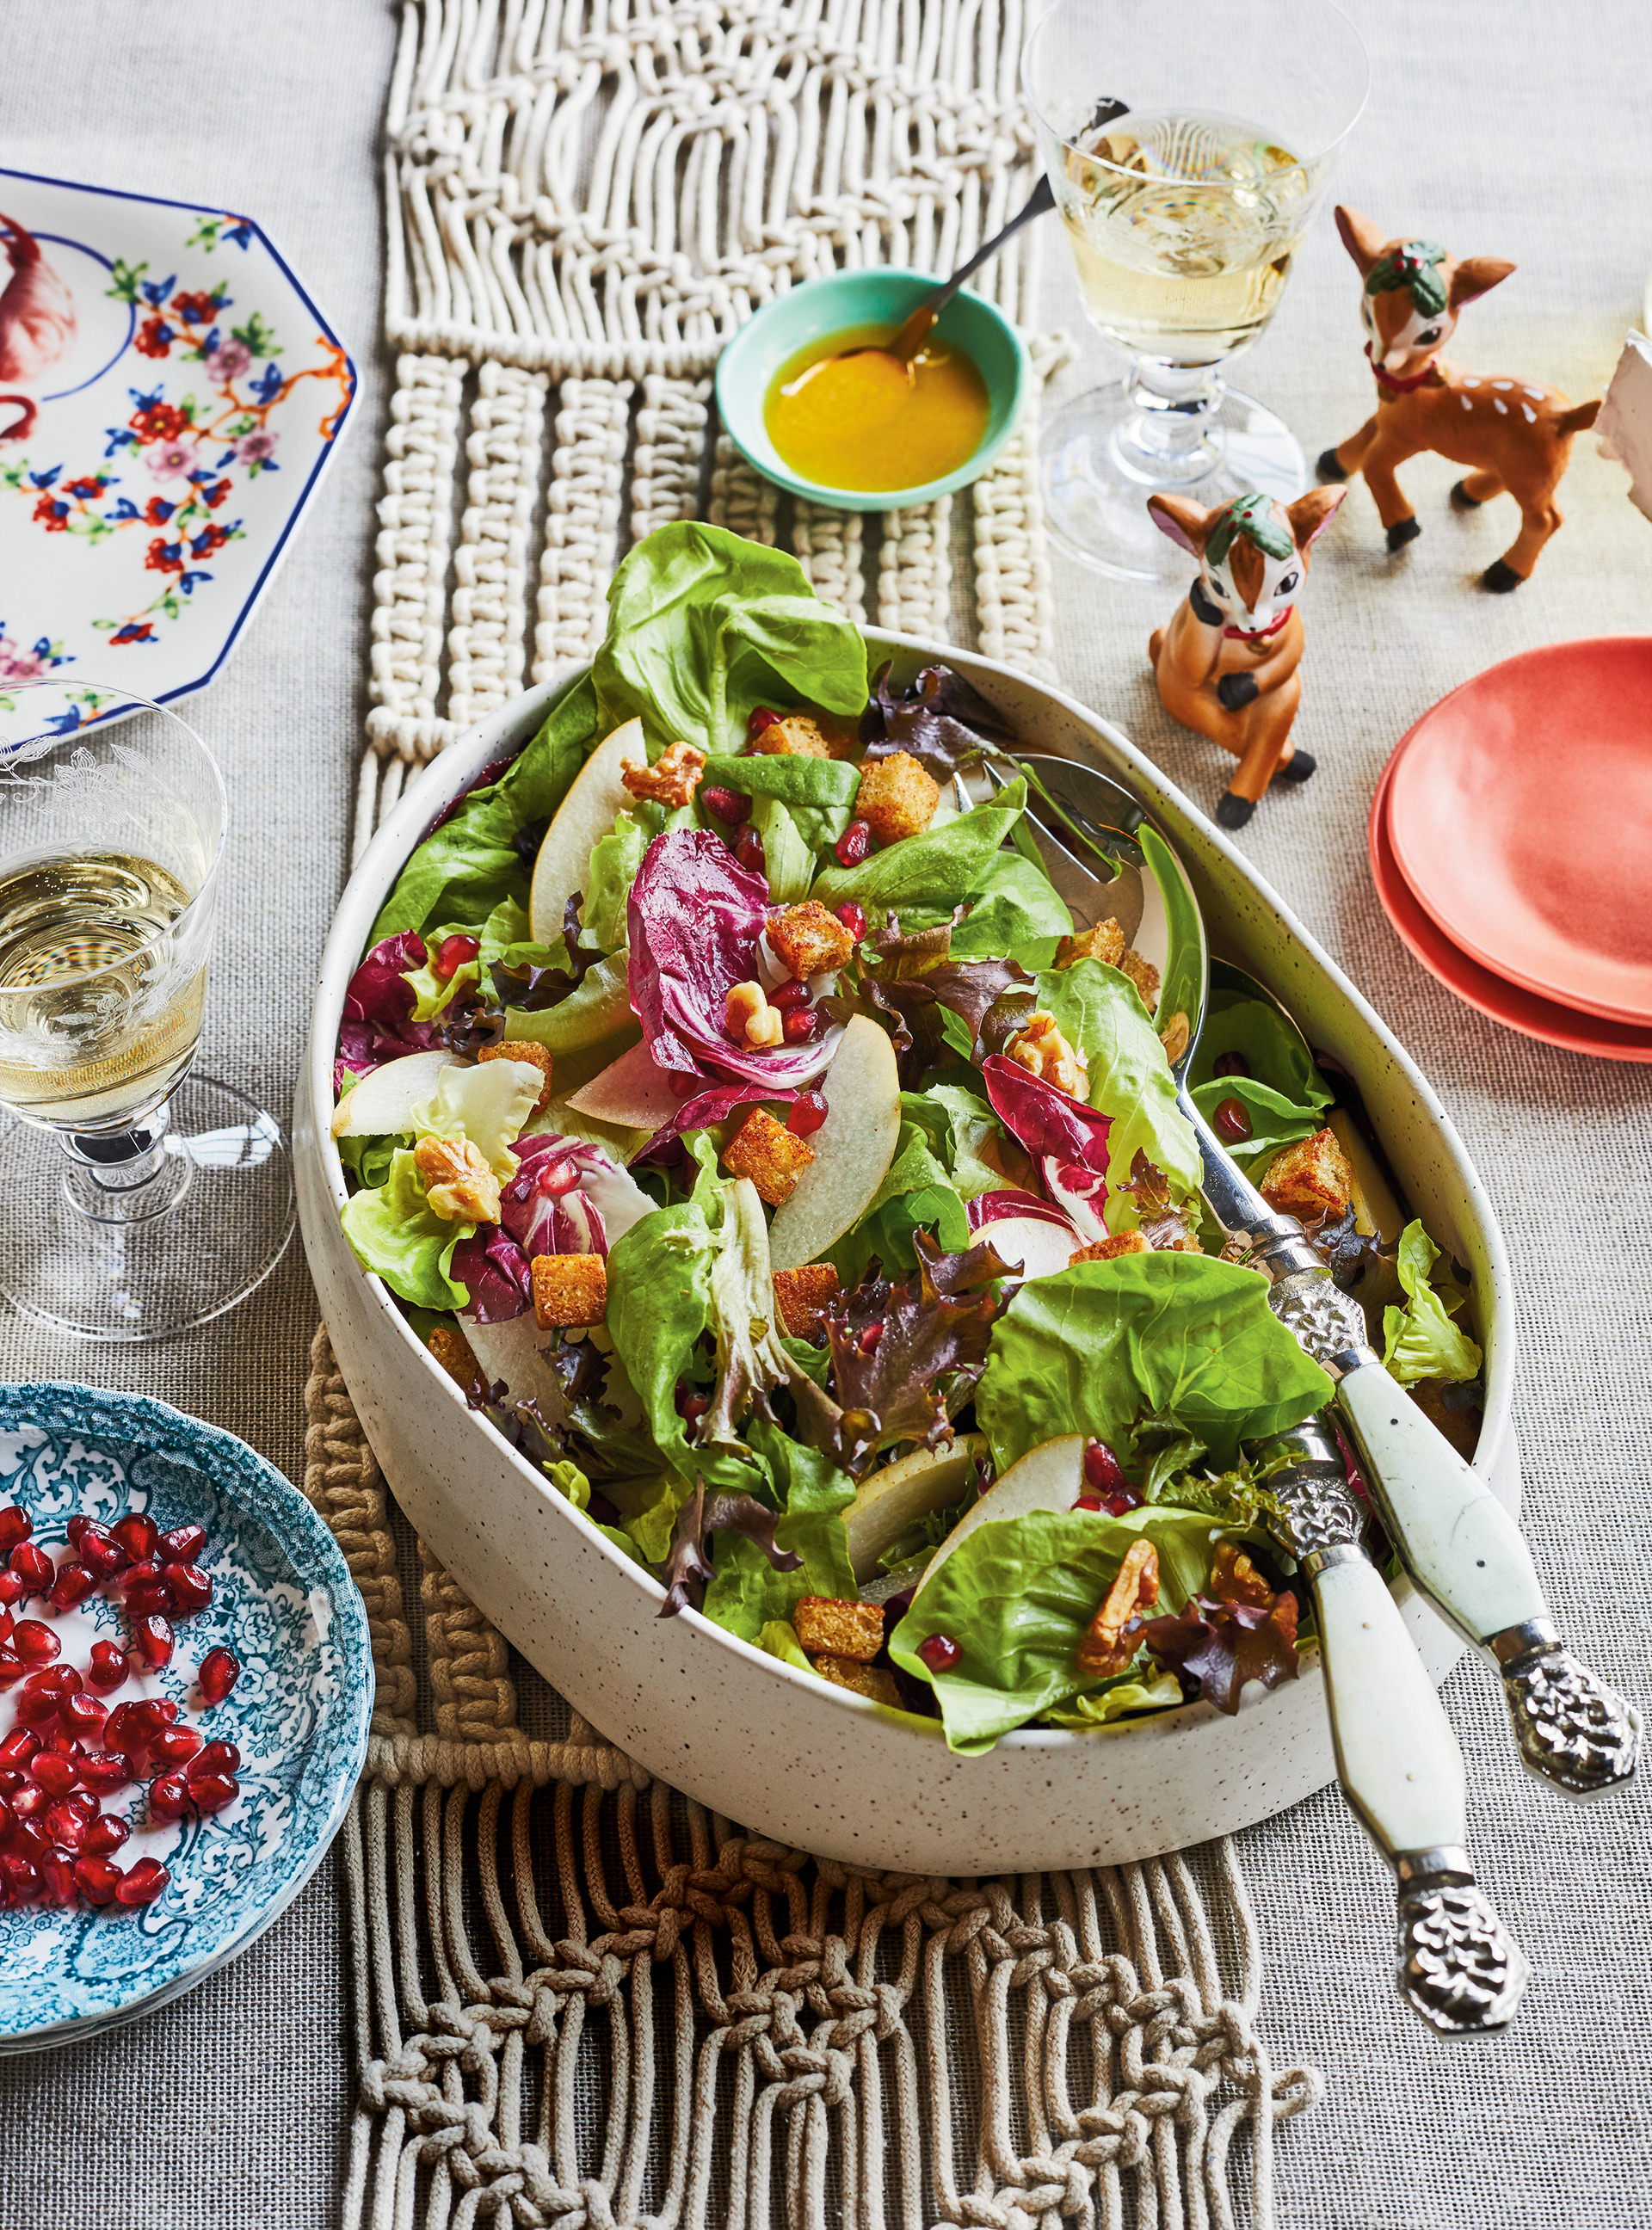 Crunchy Green Salad with Pear, Pomegranate and Spiced Croutons